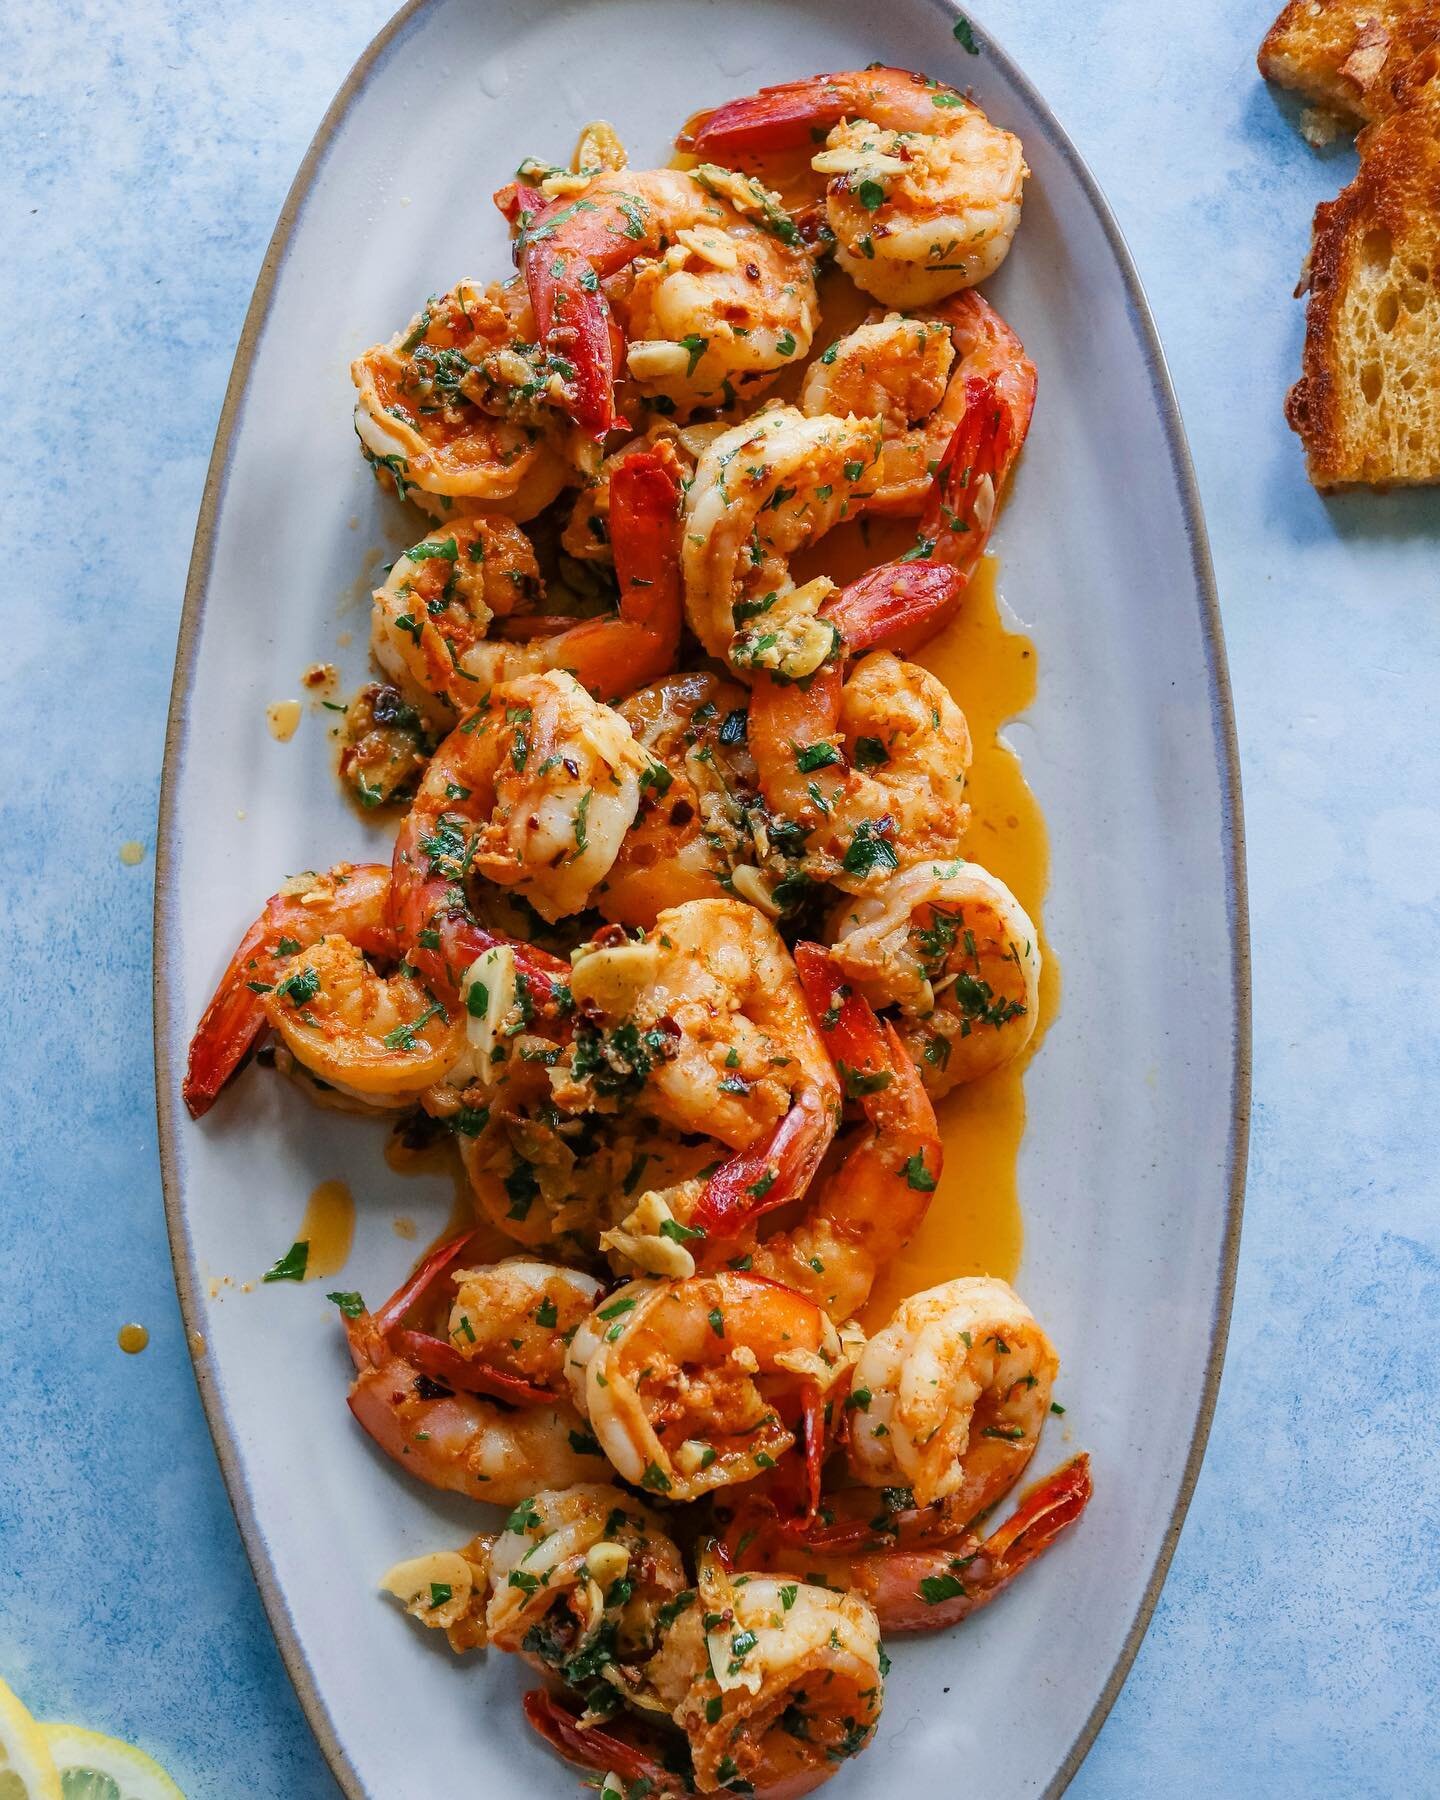 Easiest Dinner Ever on Repeat in the Lap Household &ndash; GAMBAS AL AJILLO, my way.

BOOKMARK if you know whats good for ya!

I love to have keep frozen shrimp on hand so I can whip this up whenever!

GRAB
🍋 1 Lemon
🌱 Handful of Parsley
🦐 1 Lb of